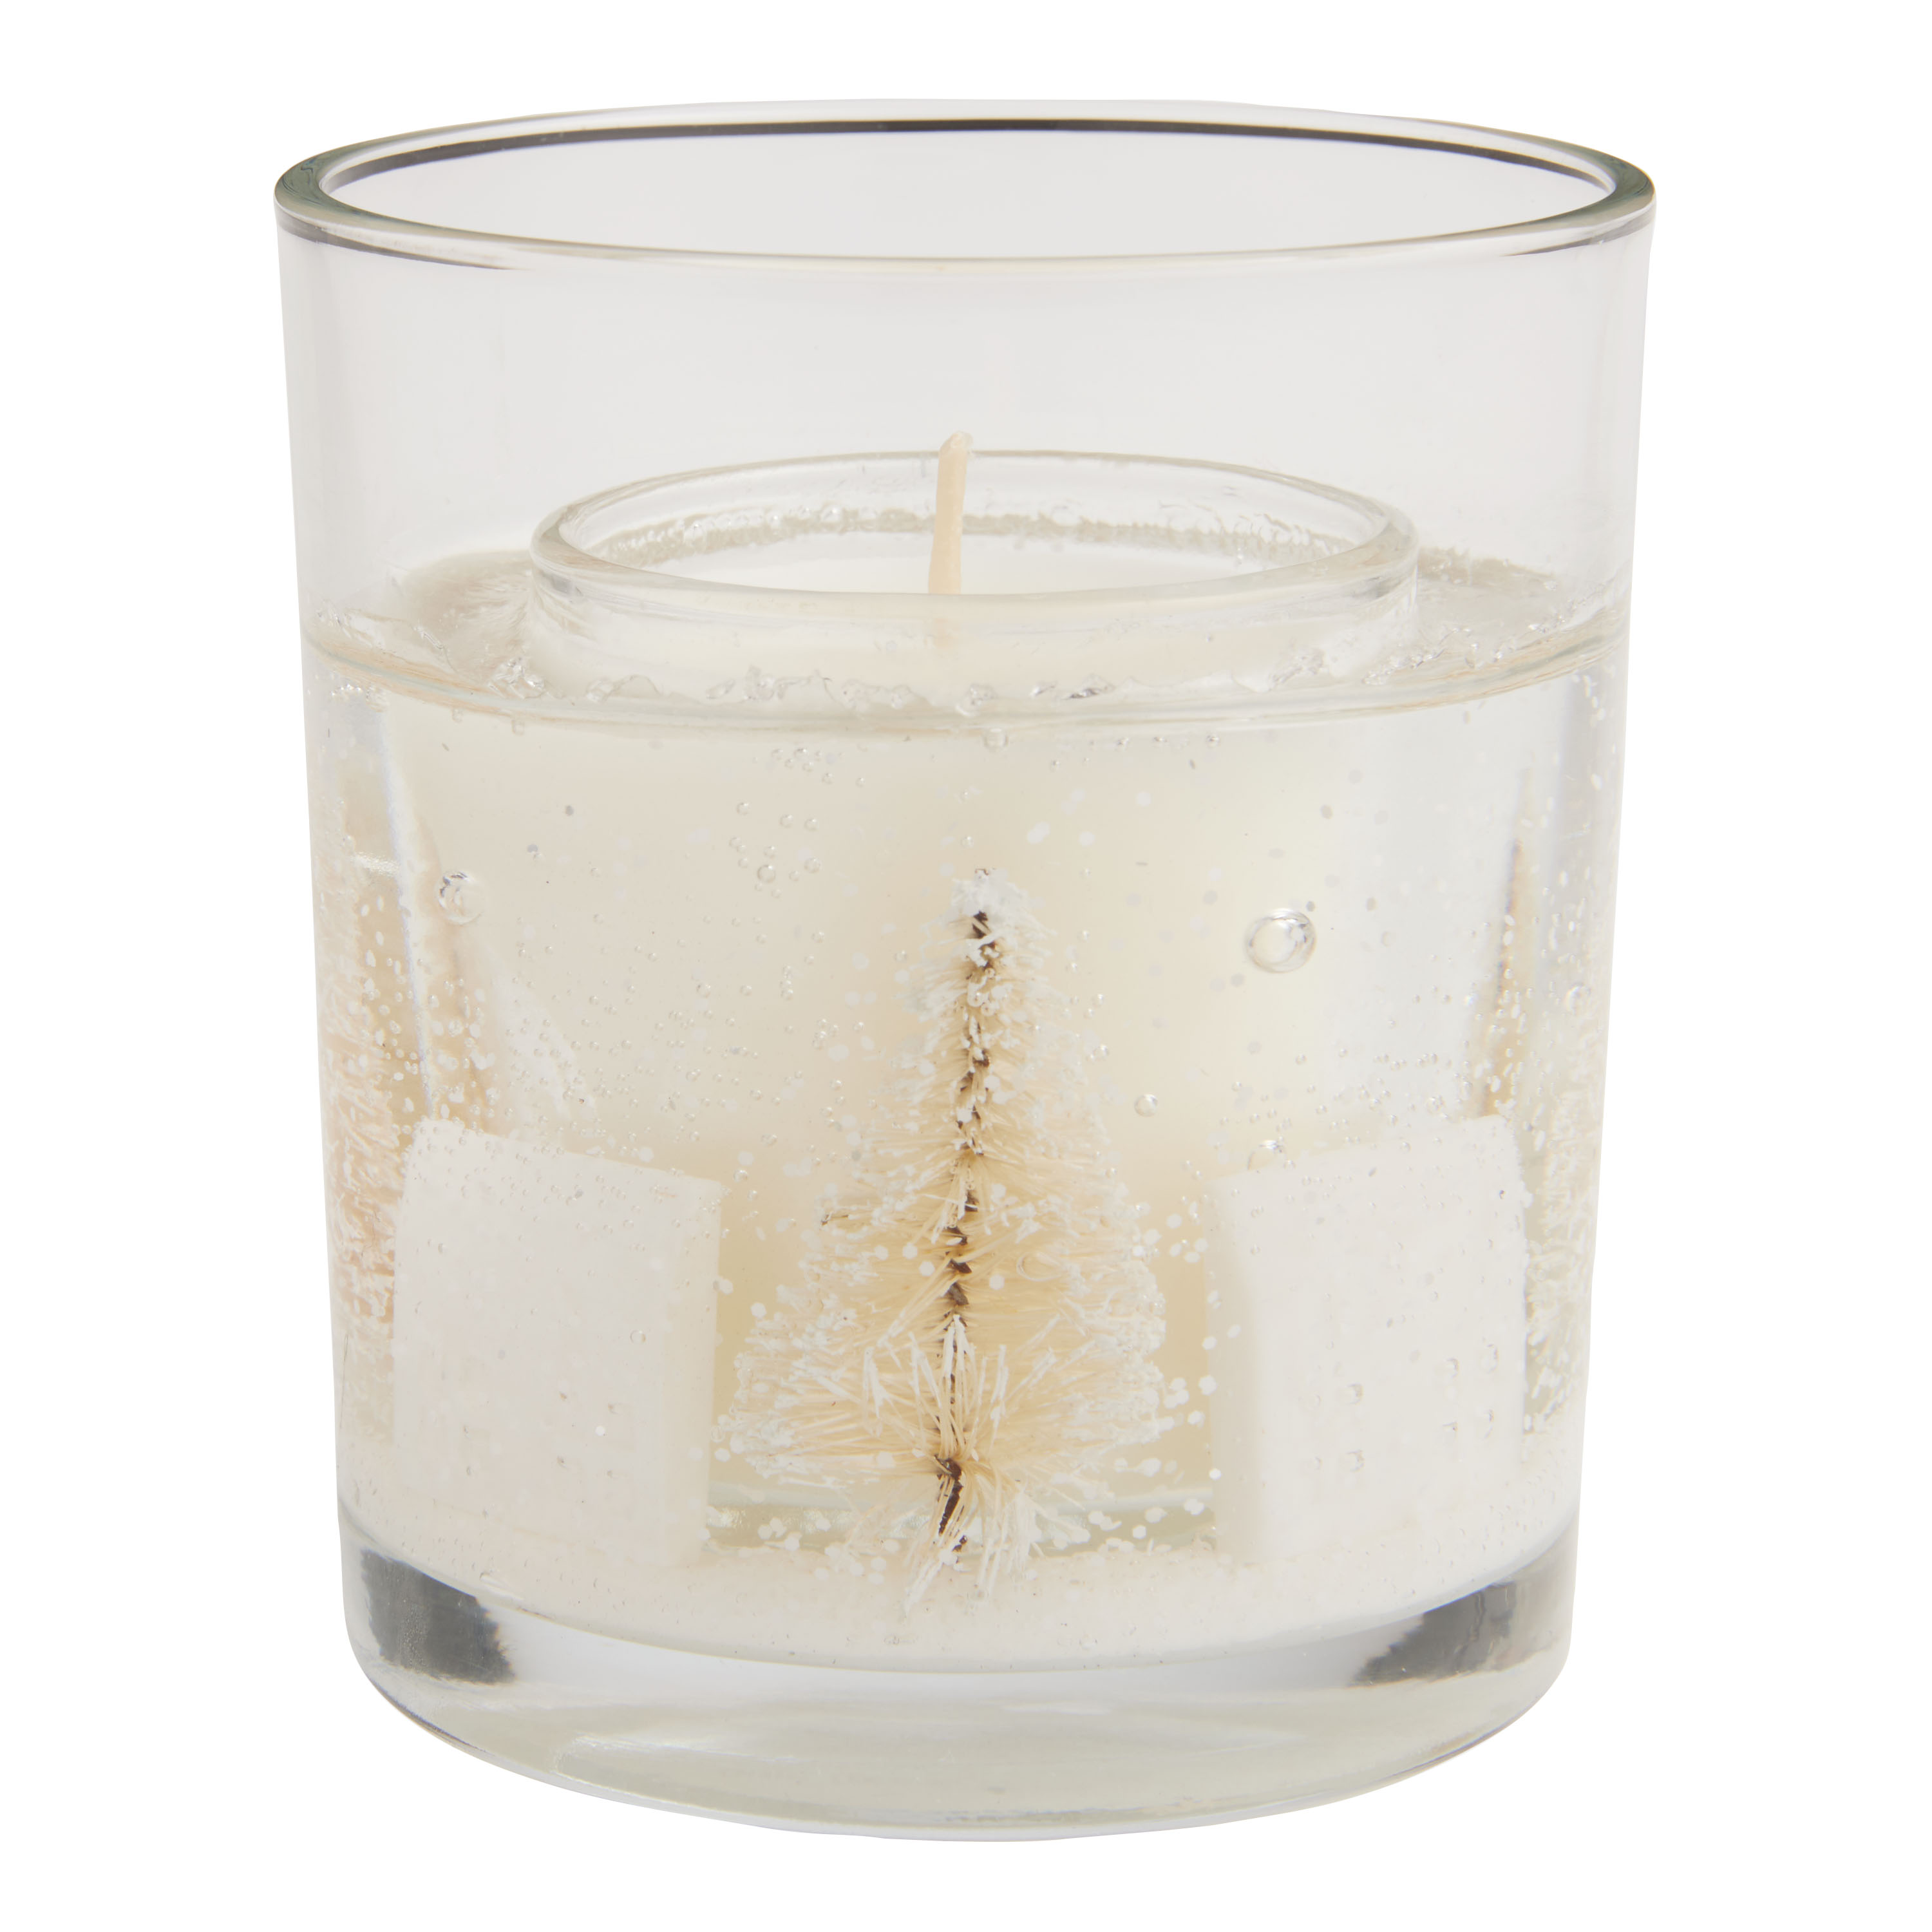 Winter Wonderland Glow Handcrafted Gel Candle for a Cozy Season